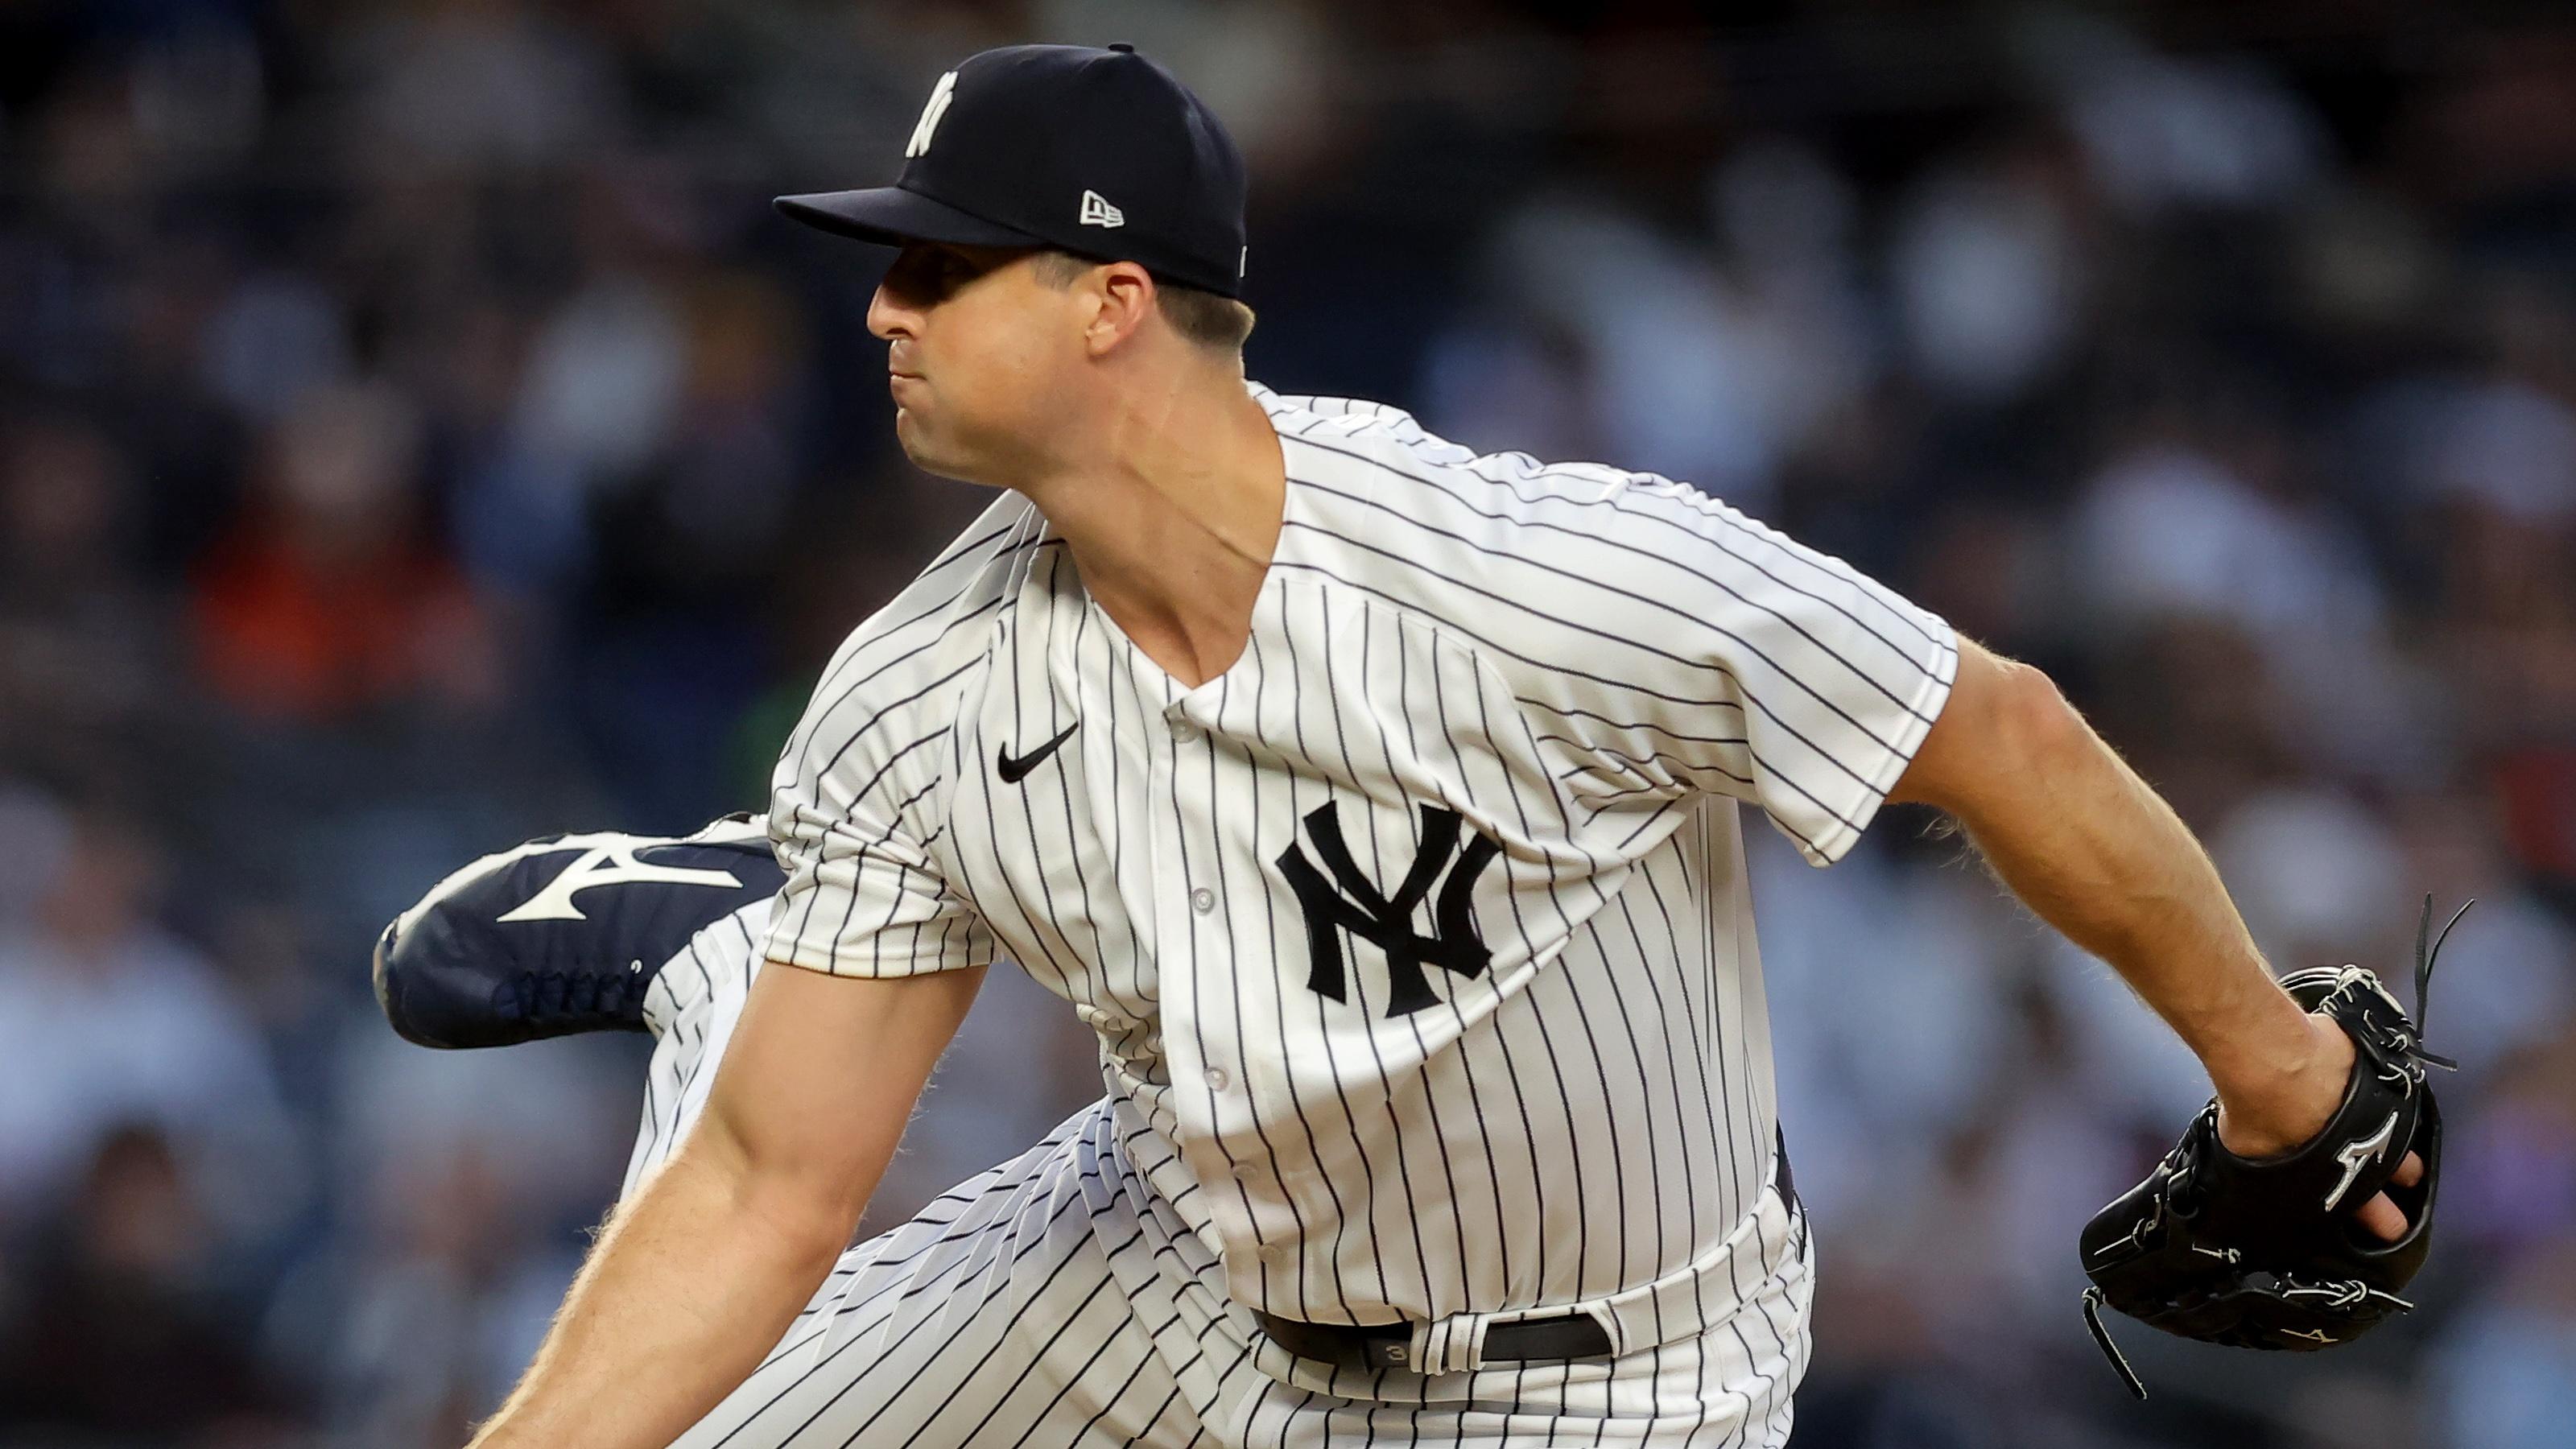 Apr 1, 2023; Bronx, New York, USA; New York Yankees relief pitcher Clay Holmes (35) pitches against the San Francisco Giants during the ninth inning at Yankee Stadium. Mandatory Credit: Brad Penner-USA TODAY Sports / © Brad Penner-USA TODAY Sports